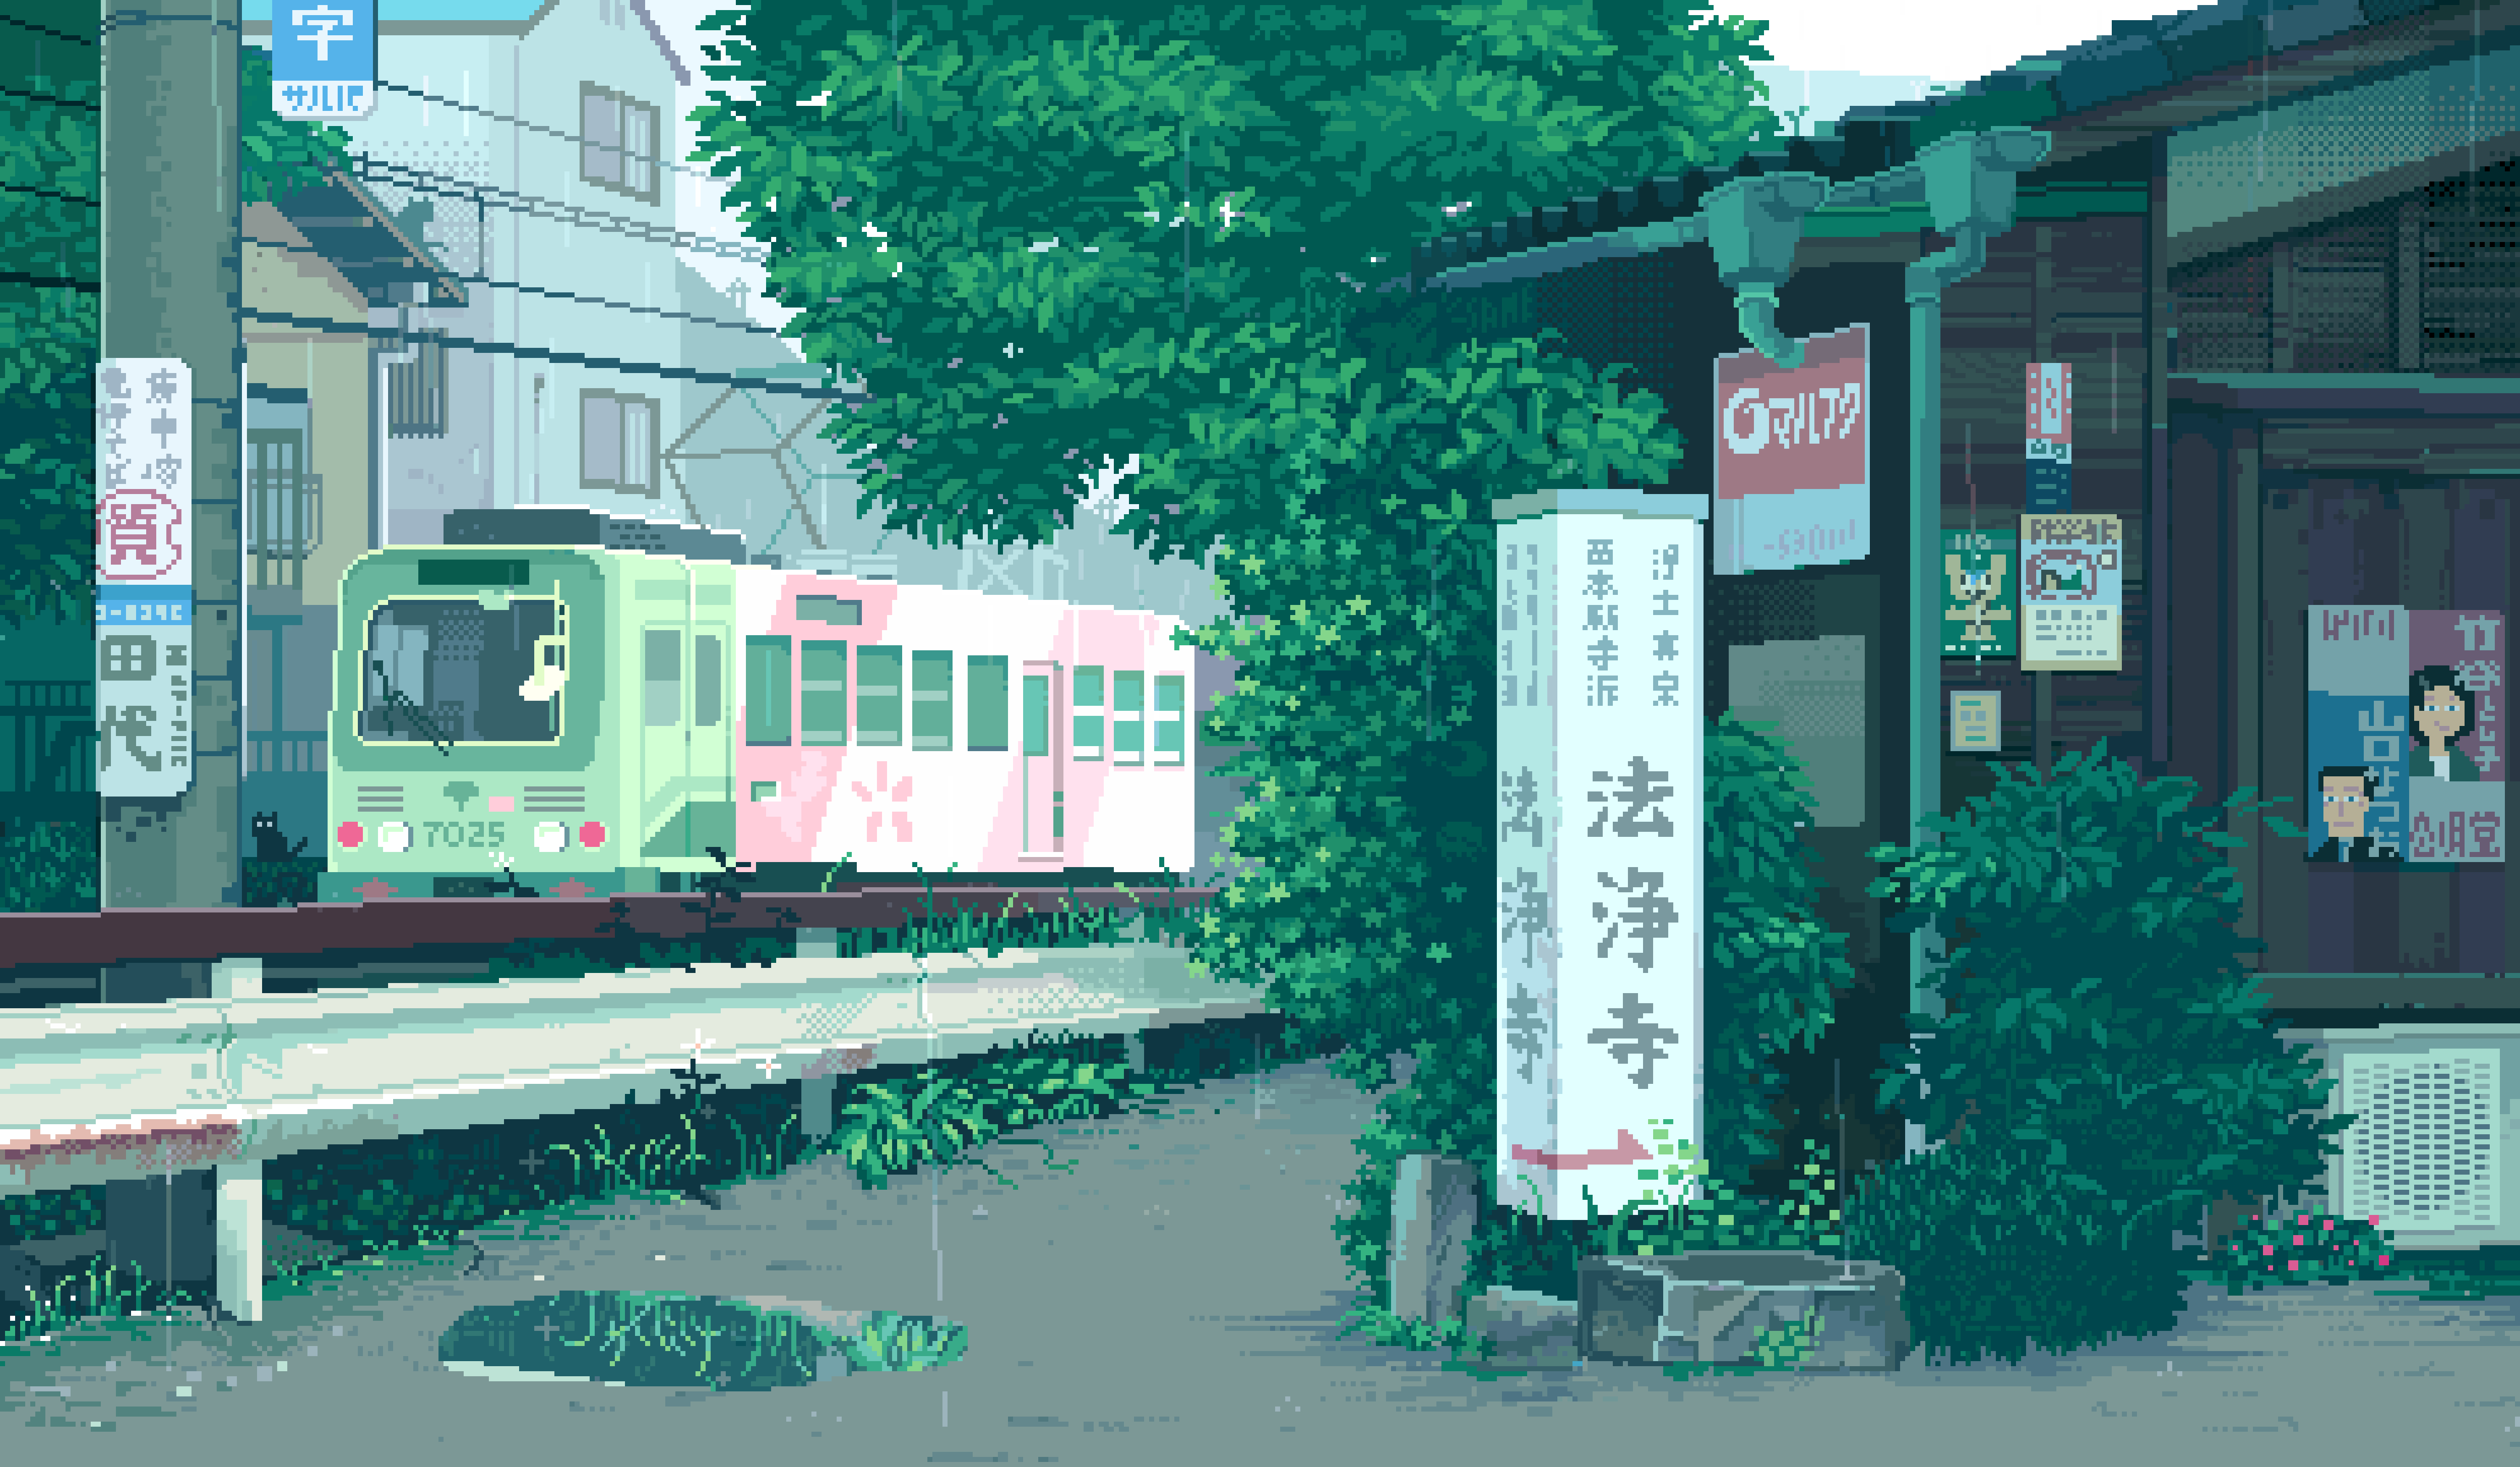 A train is passing by some buildings - Pixel art